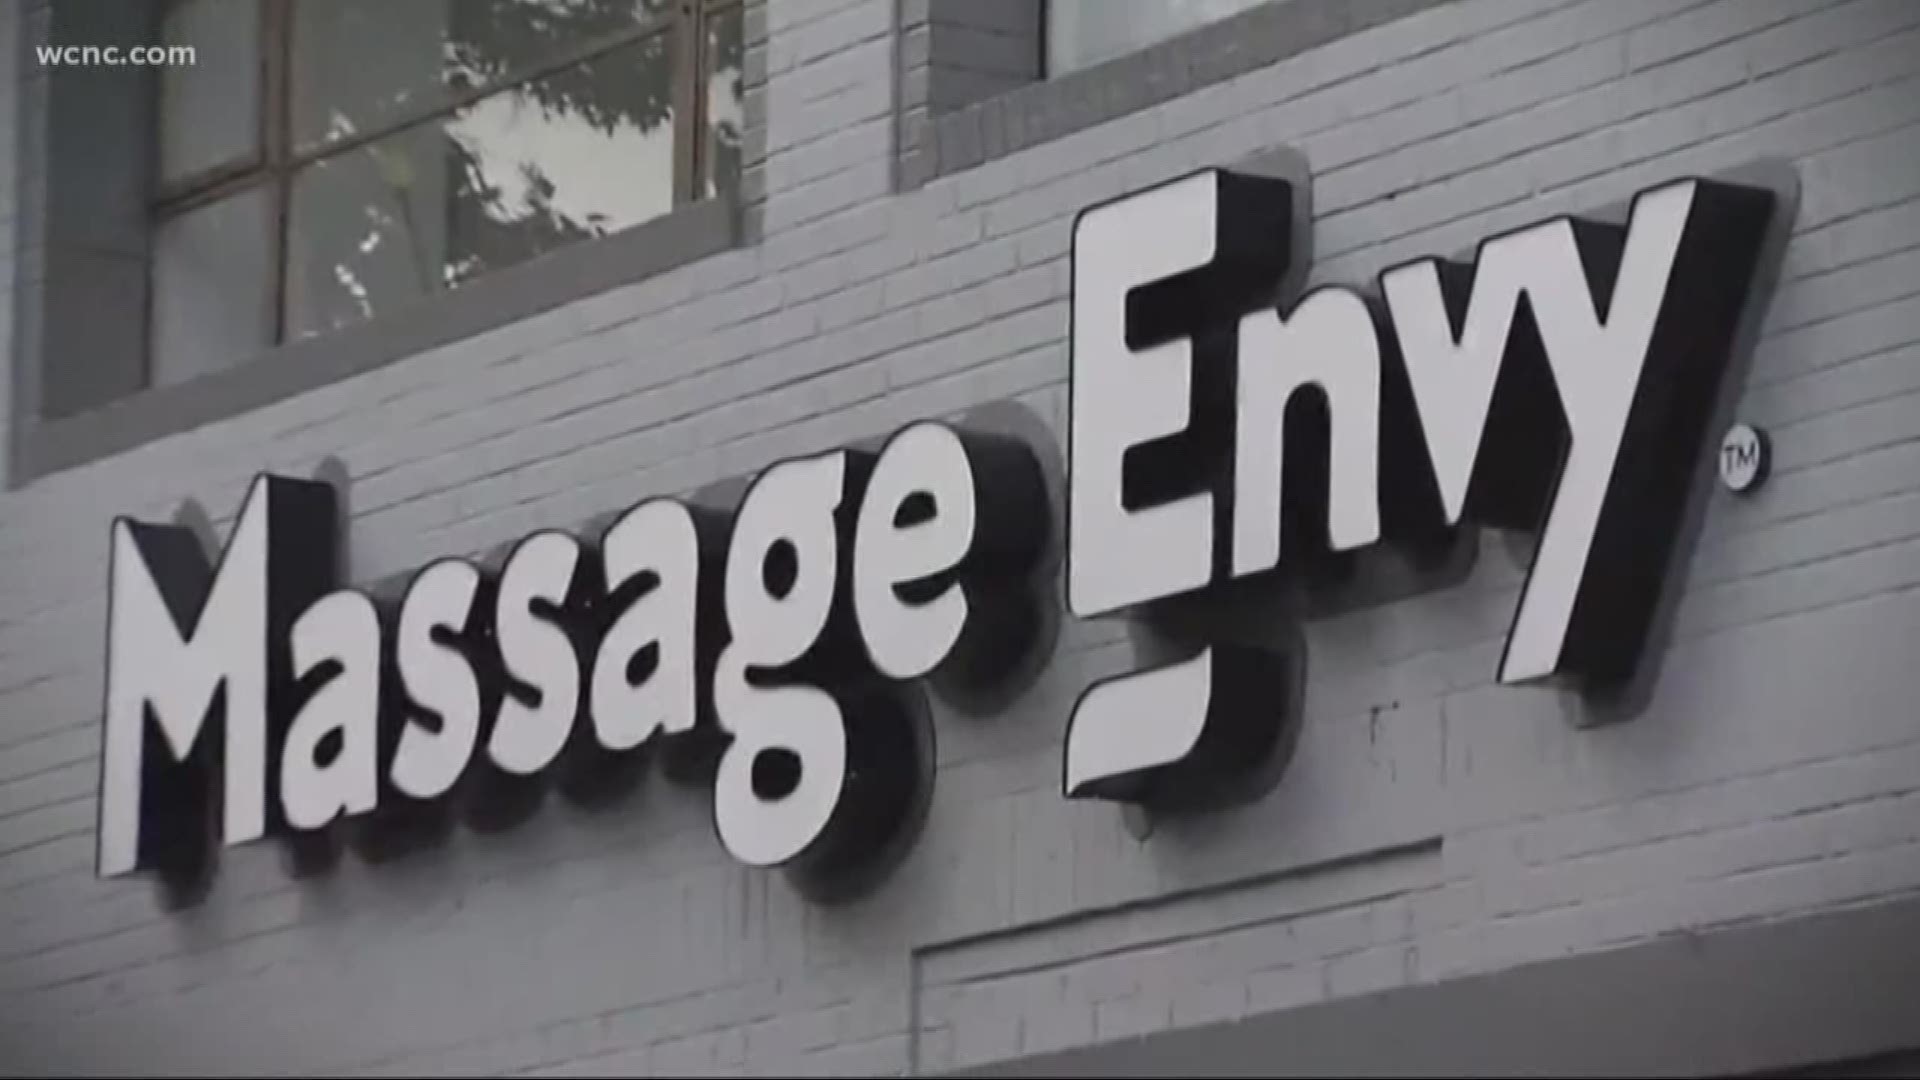 In recent years and months, women in other parts of the country have spoken out with their own horror stories about Massage Envy therapists allegedly crossing the line.